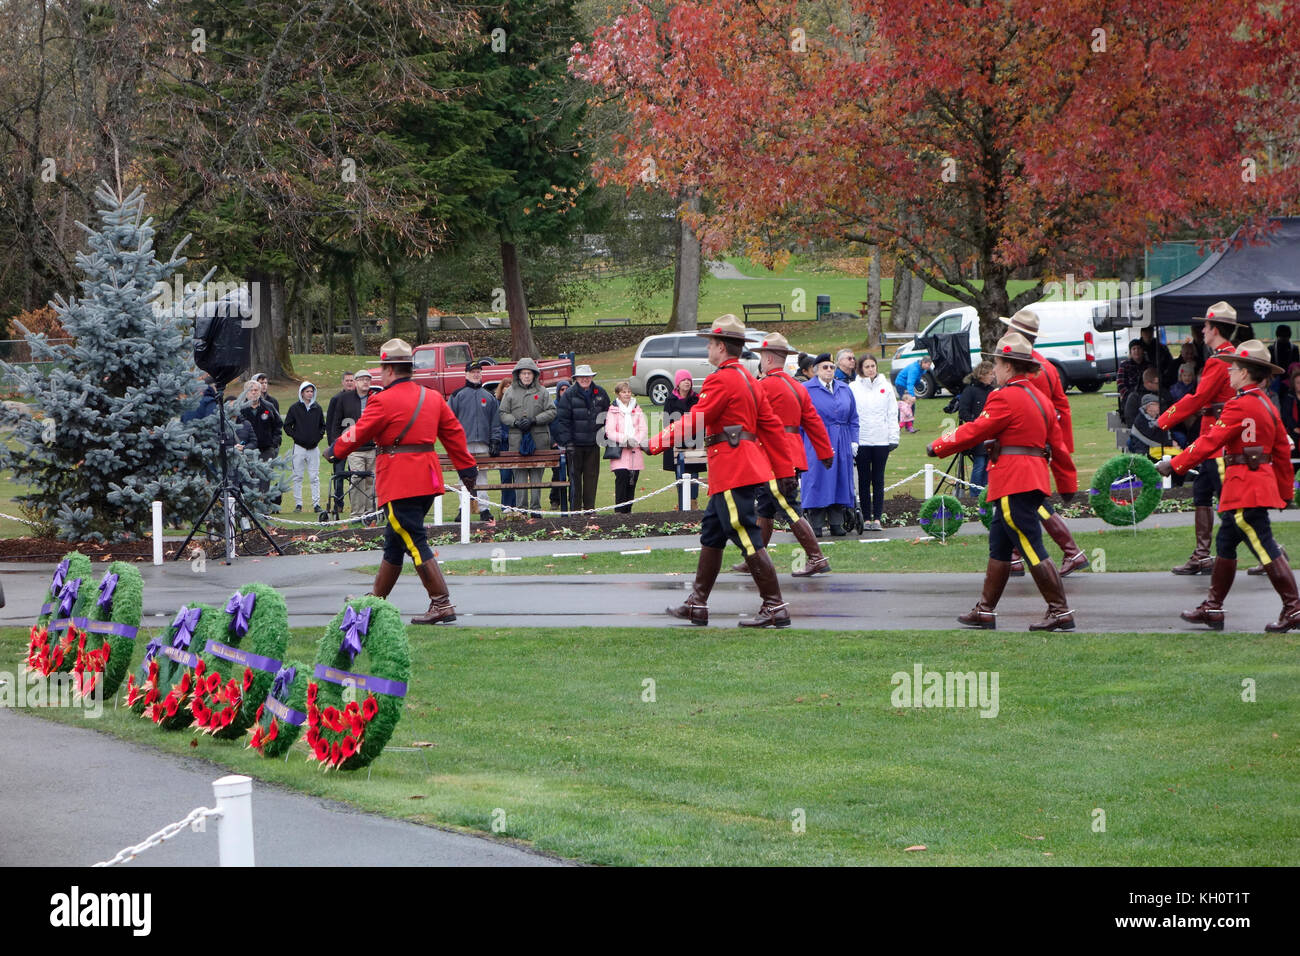 Burnaby, BC, Canada. 11th November, 2017. Members of the Burnaby Royal Canadian Mounted Police (RCMP) march into Confederation Park in their Red Serge uniforms, prior to the start of the Remembrance Day ceremony. Stock Photo